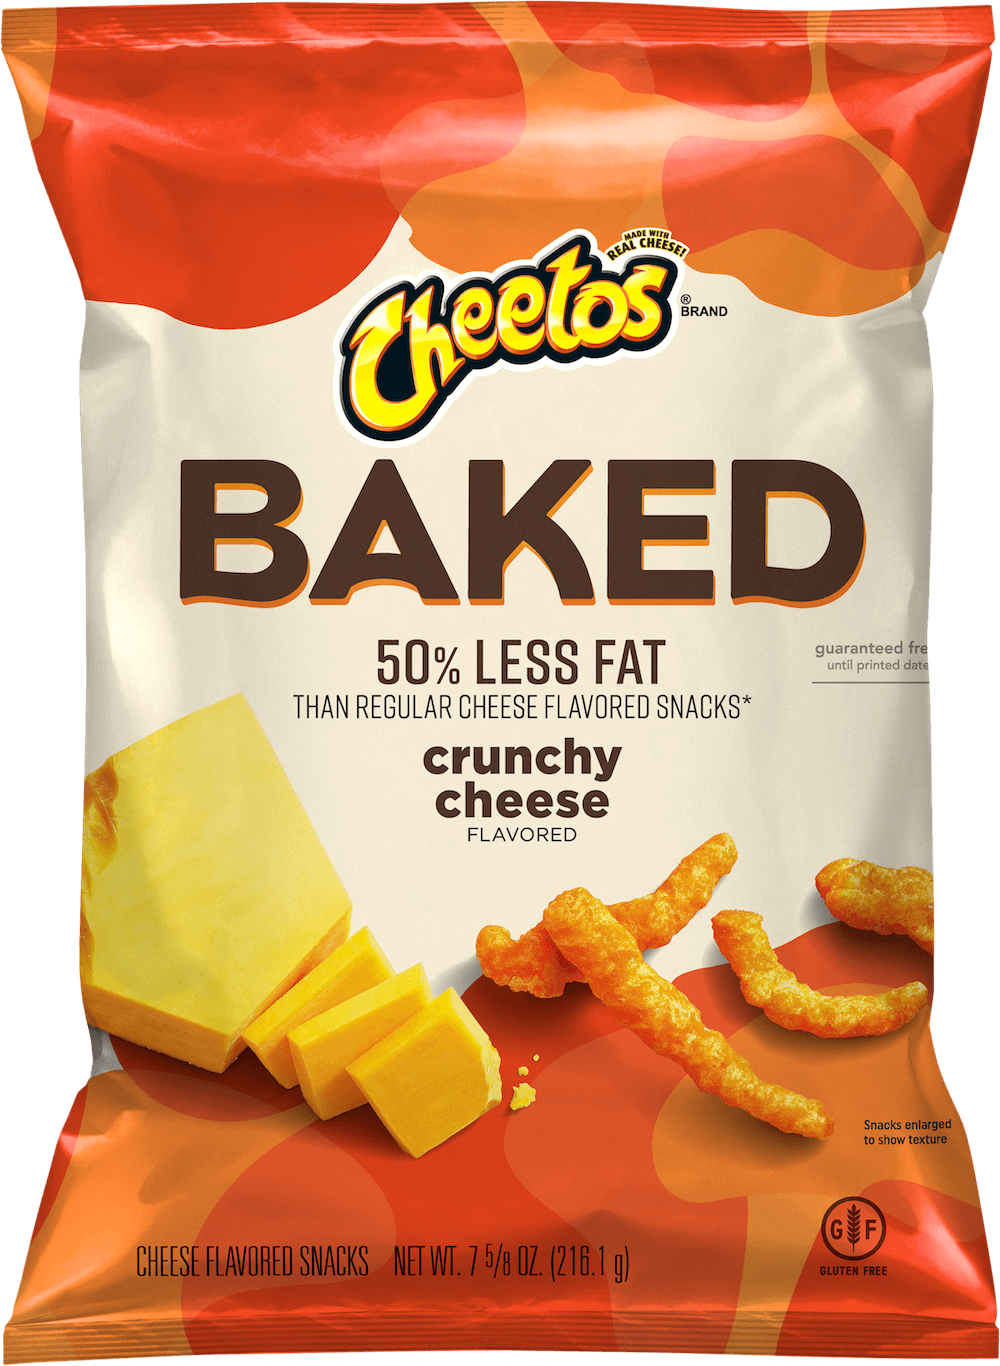 https://www.fritolay.com/sites/fritolay.com/files/2022-02/Baked_2021_Cheetos_CC_7.6oz_Render.png